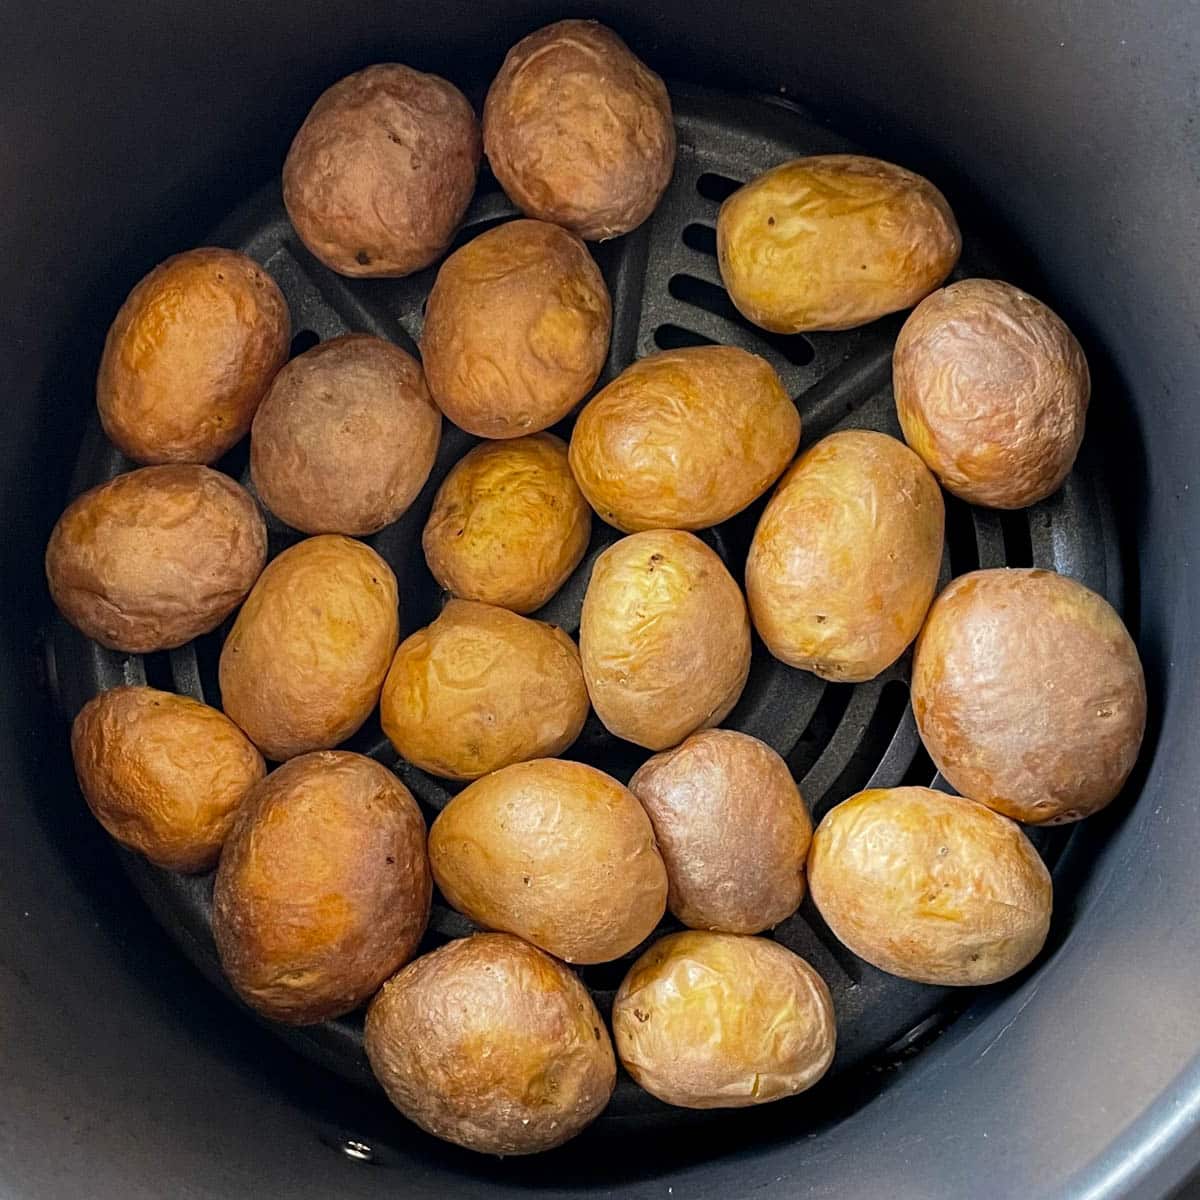 Roasted baby yellow potatoes are shown in the base of an air fryer basket.